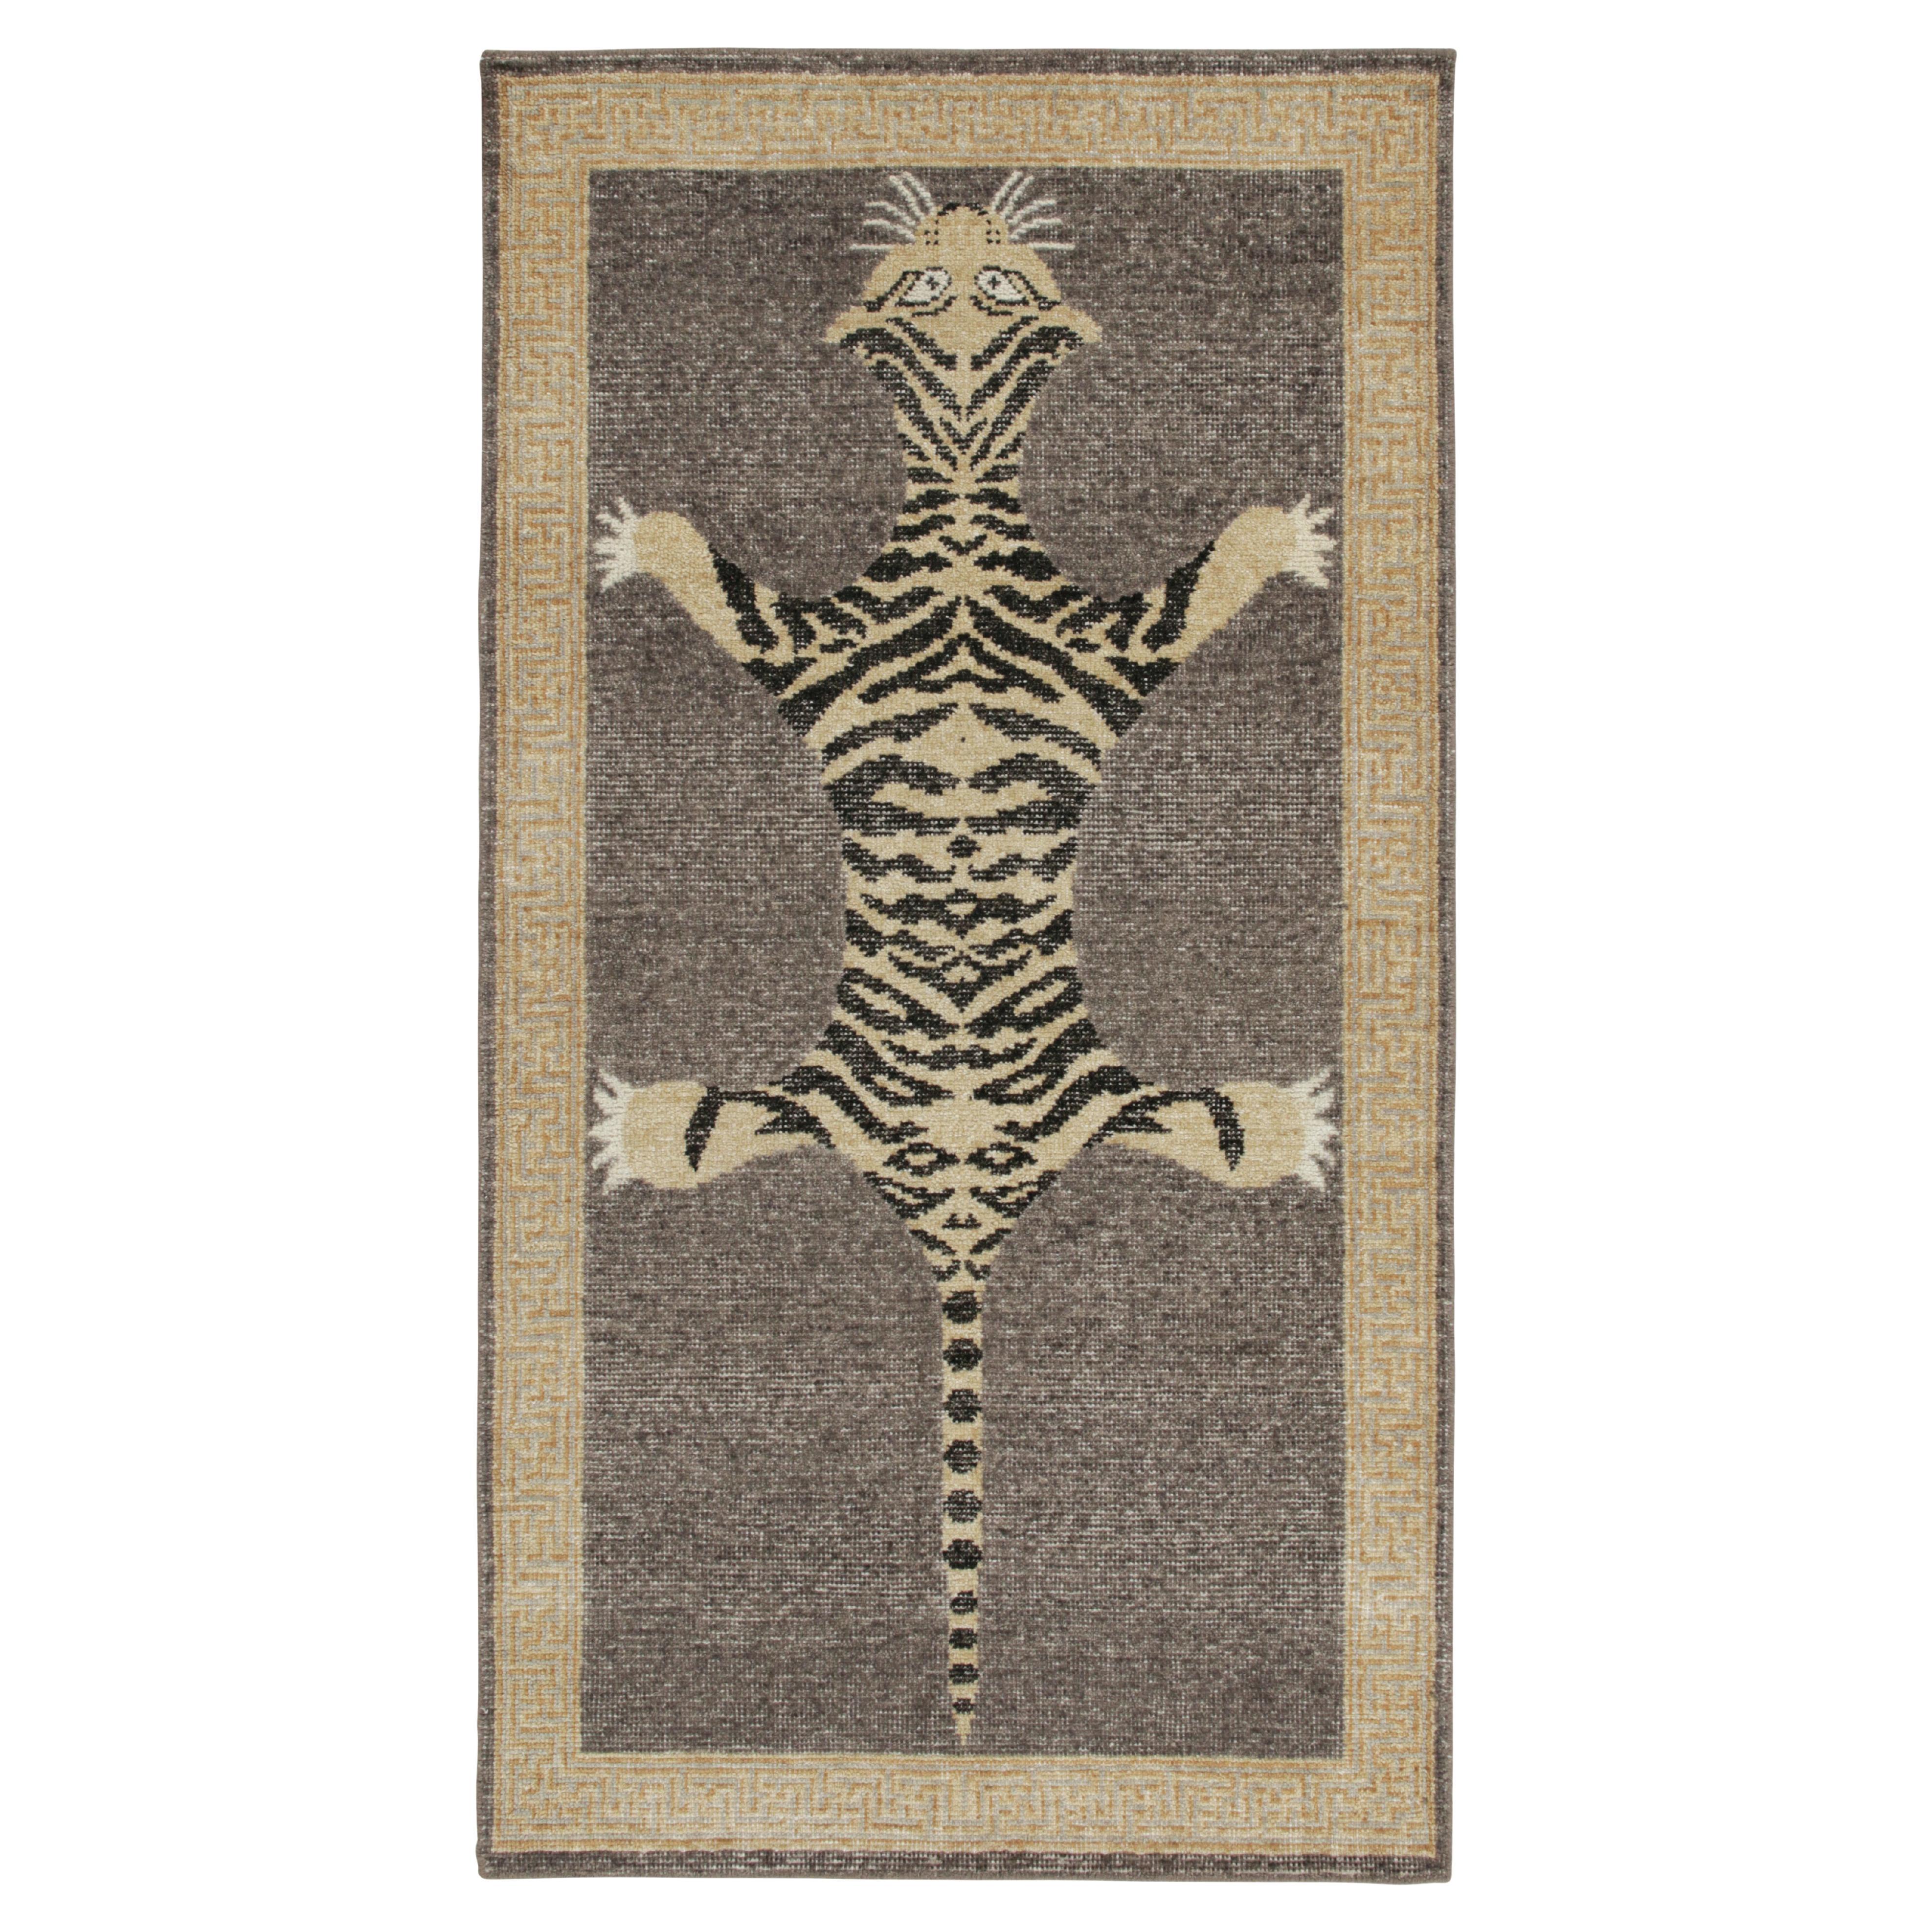 Rug & Kilim’s Distressed Style Tiger Runner in Gray, Beige and Black Pictorial For Sale